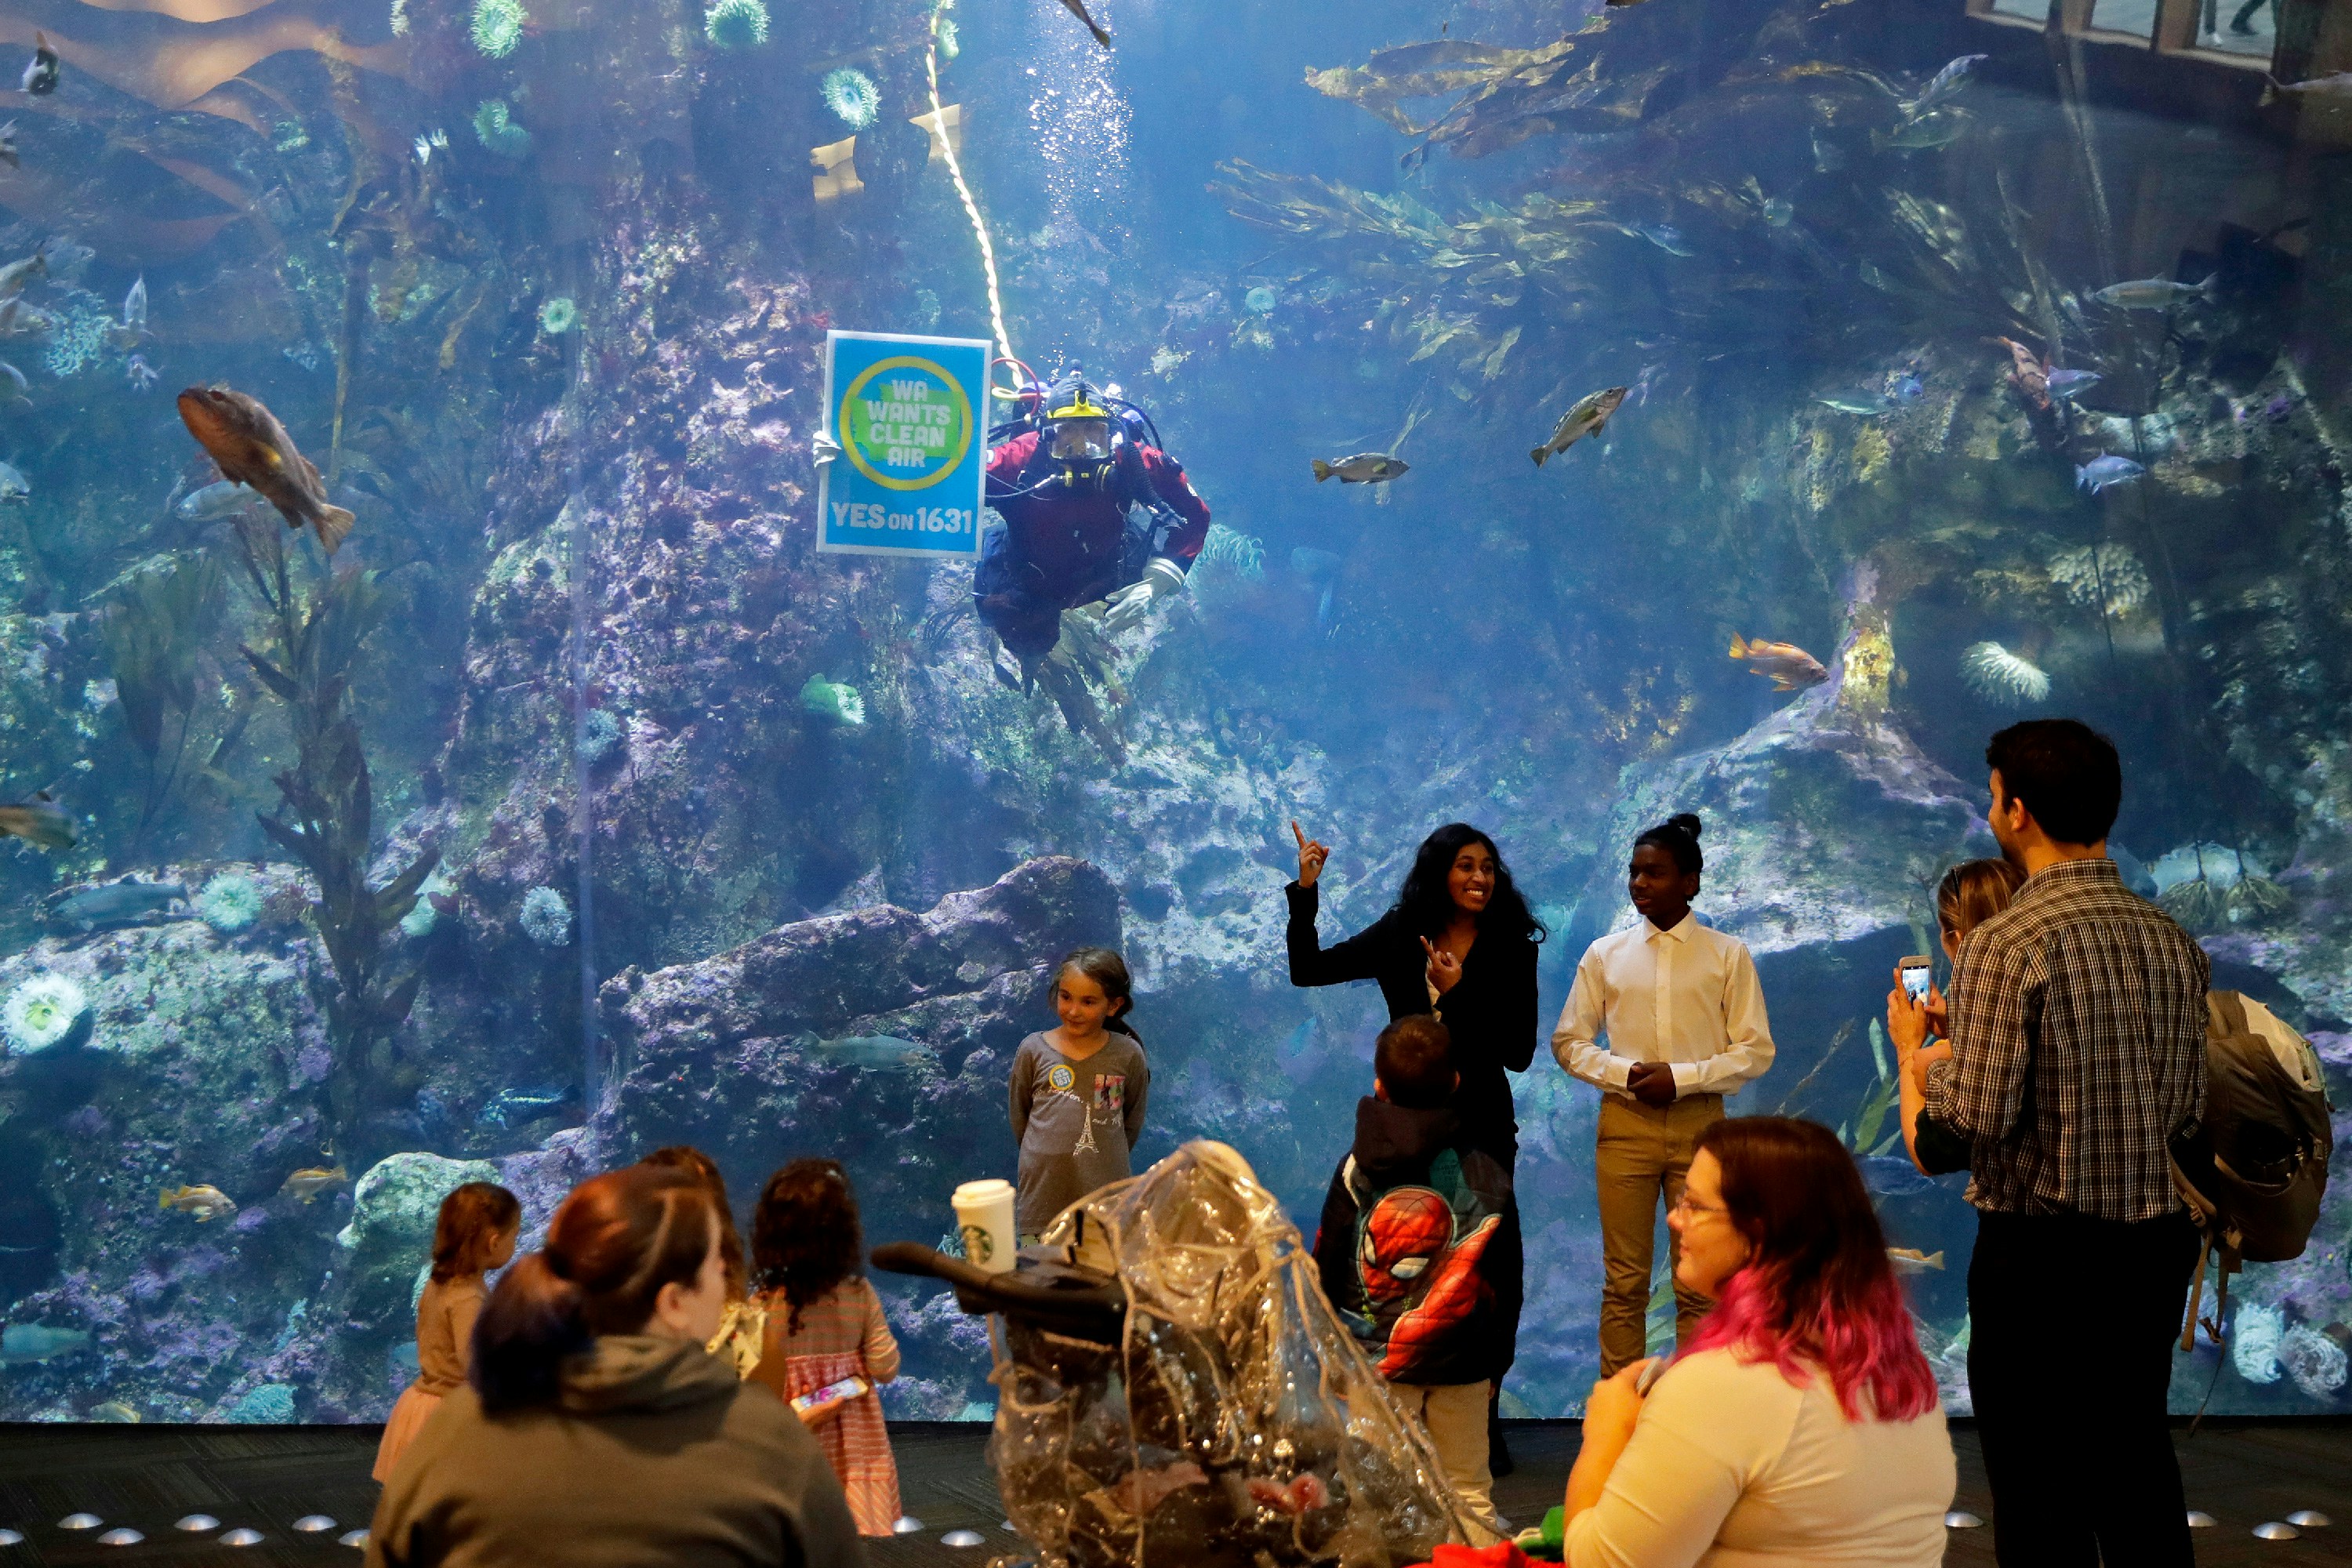 Diver Kim Thomas holds a "Yes on 1631" sign as she dives in a large aquarium display at the Seattle Aquarium during an event to announce the endorsement of Initiative 1631 by the aquarium and the Woodland Park Zoo, Thursday, Oct. 25, 2018, in Seattle. Voters will consider I-1631, which would charge large polluters an escalating fee on fossil-fuel emissions, in the upcoming Nov. 6, 2018 election. (AP Photo/Ted S. Warren)